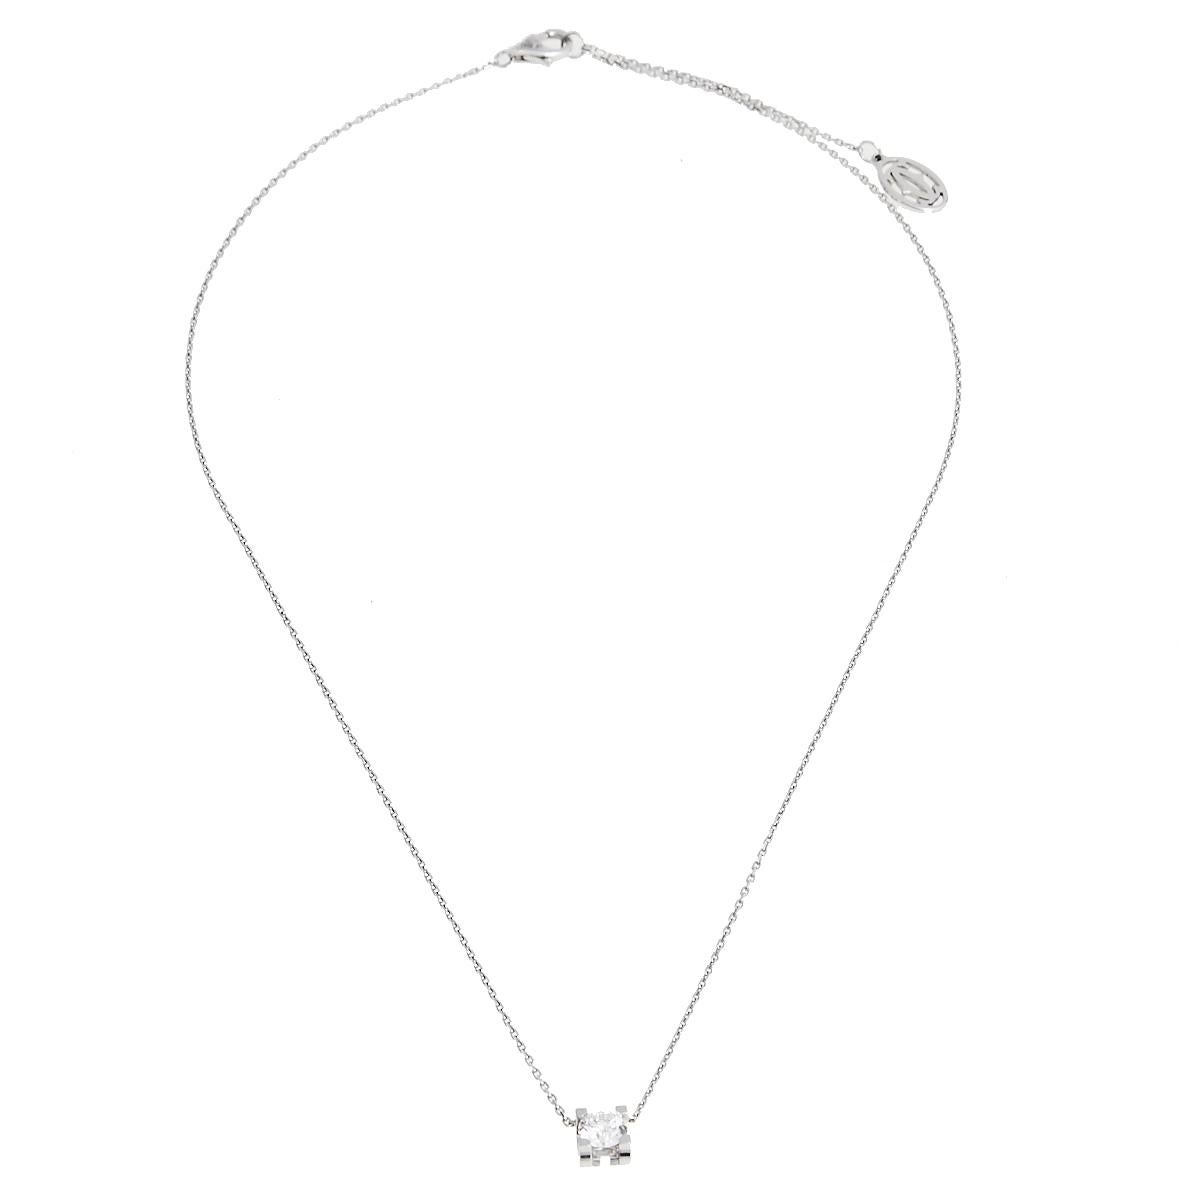 This C de Cartier piece is a beauty to behold. It has been crafted out of 18k white gold and styled with a simple chain that holds a single solitaire diamond pendant. The diamond weighs 0.53 ct and is stationed in a four-prong setting. It also